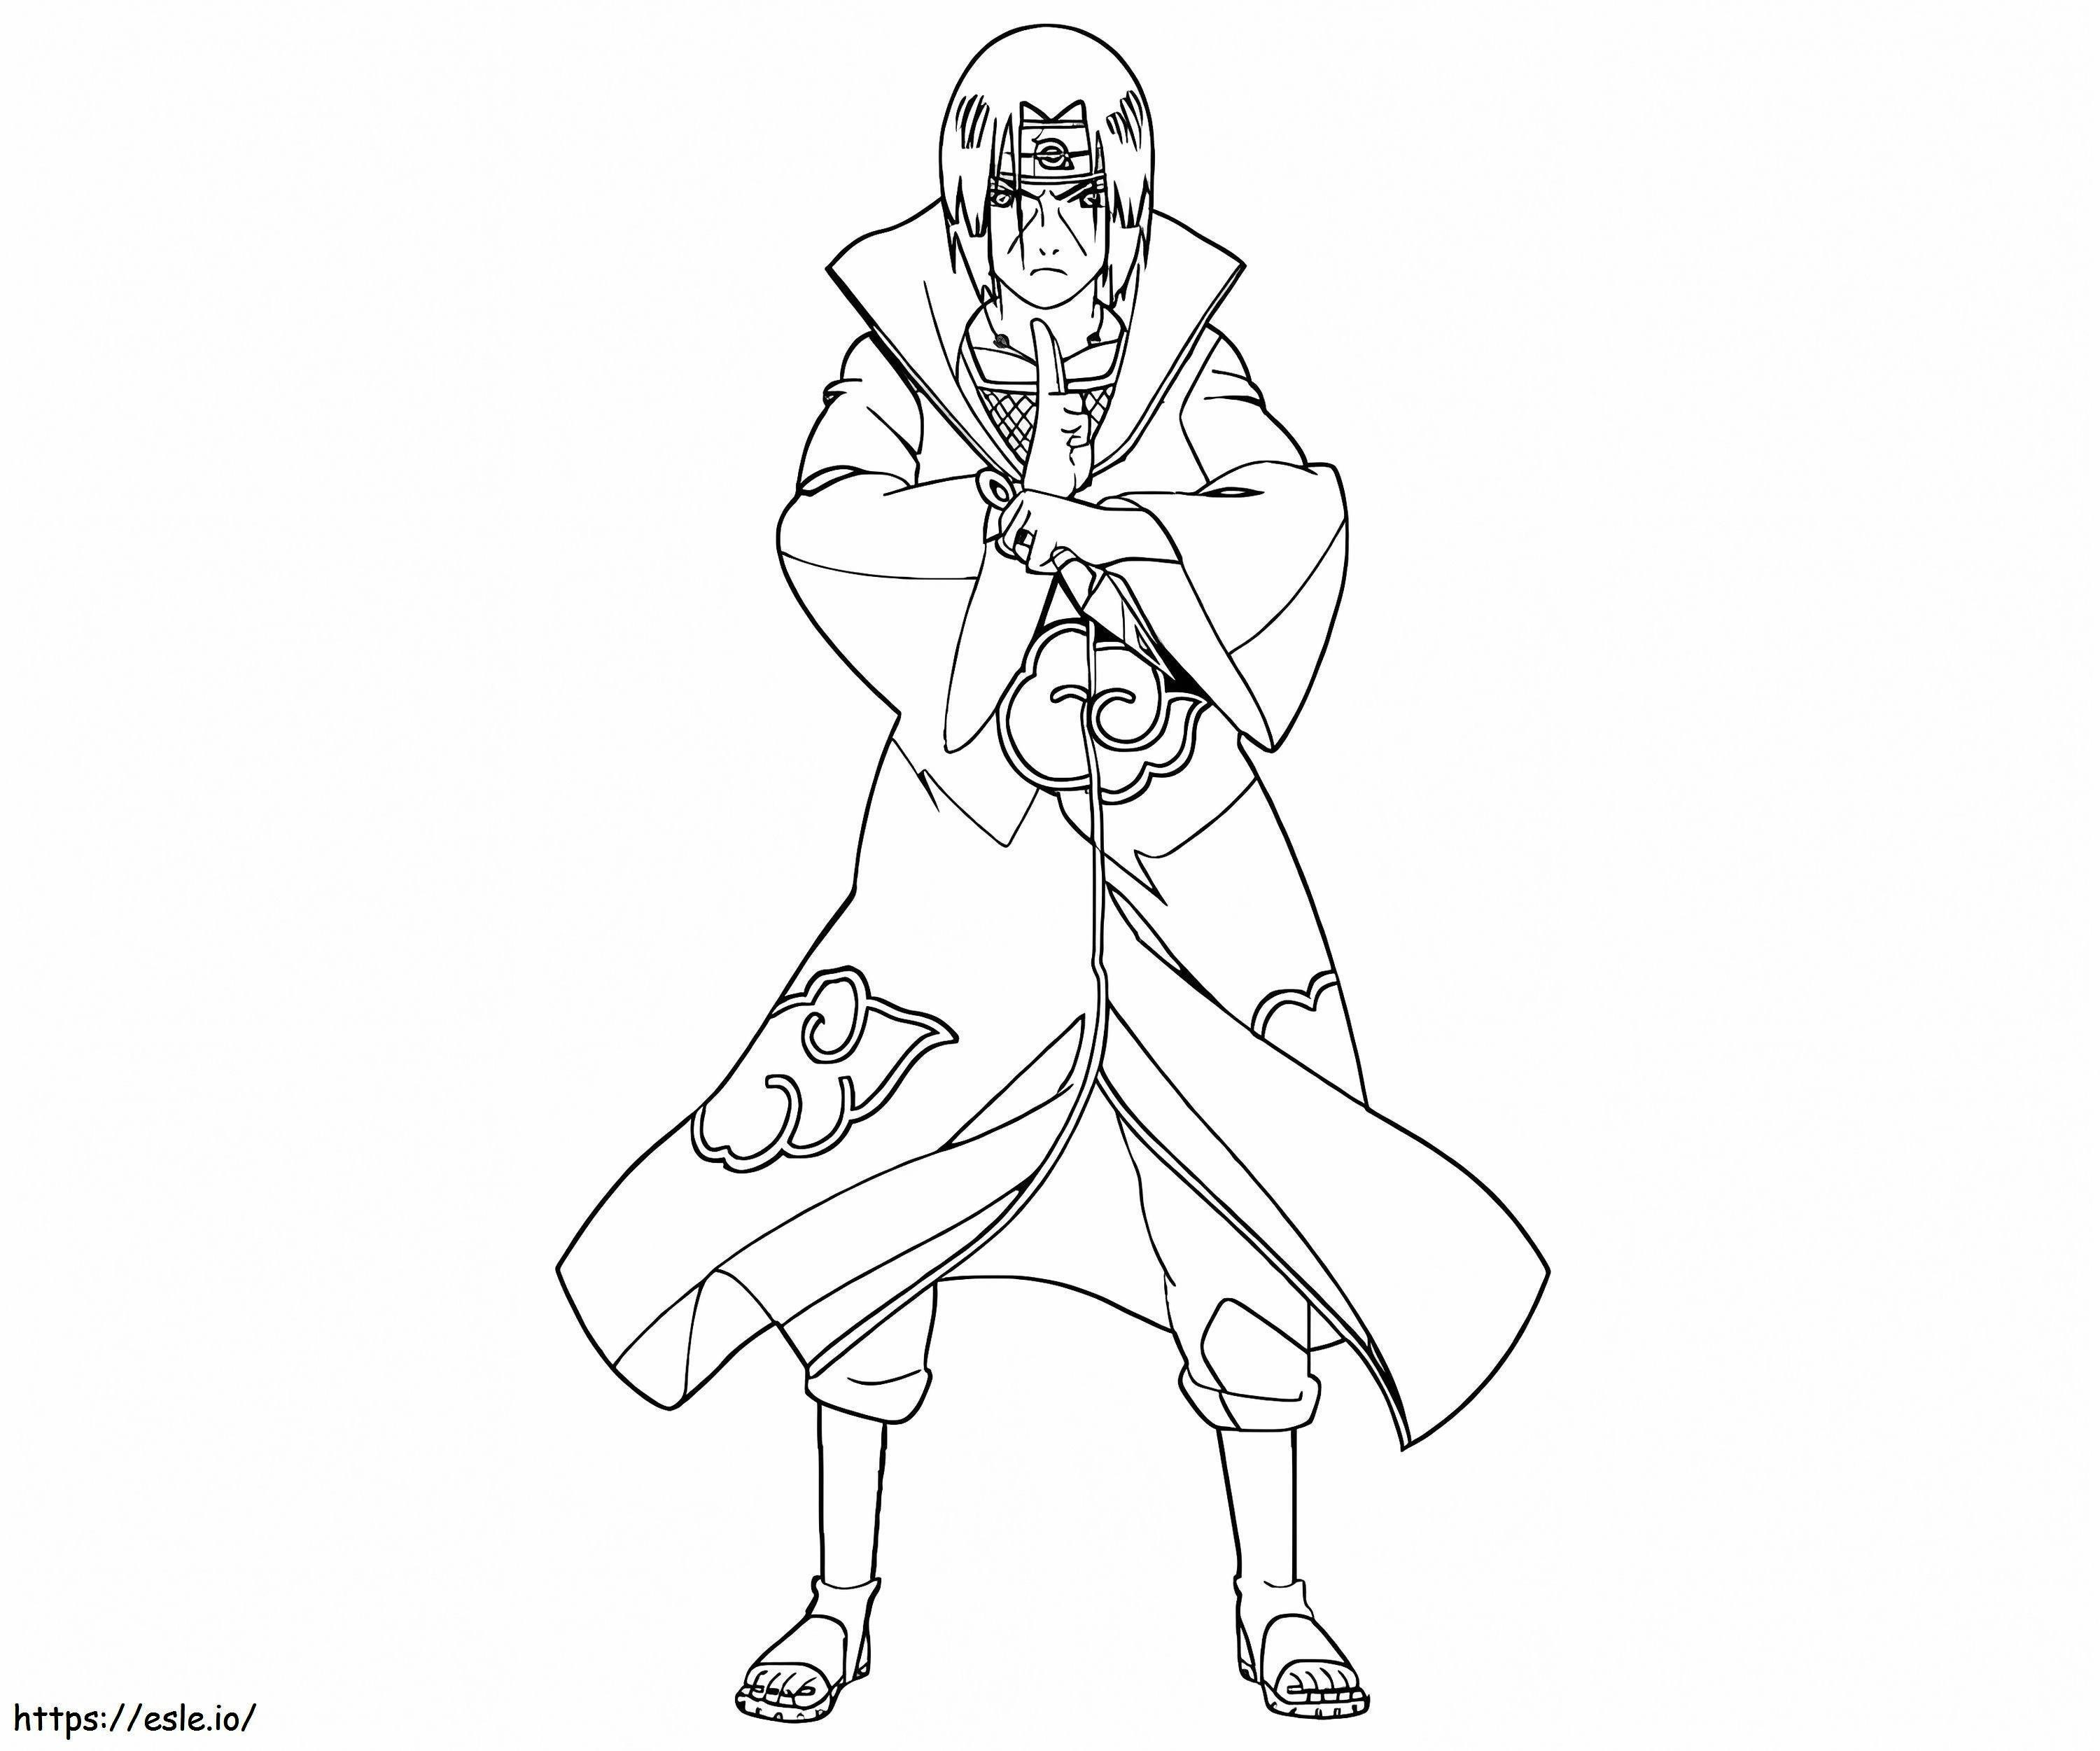 Itachi Fighting 1 coloring page